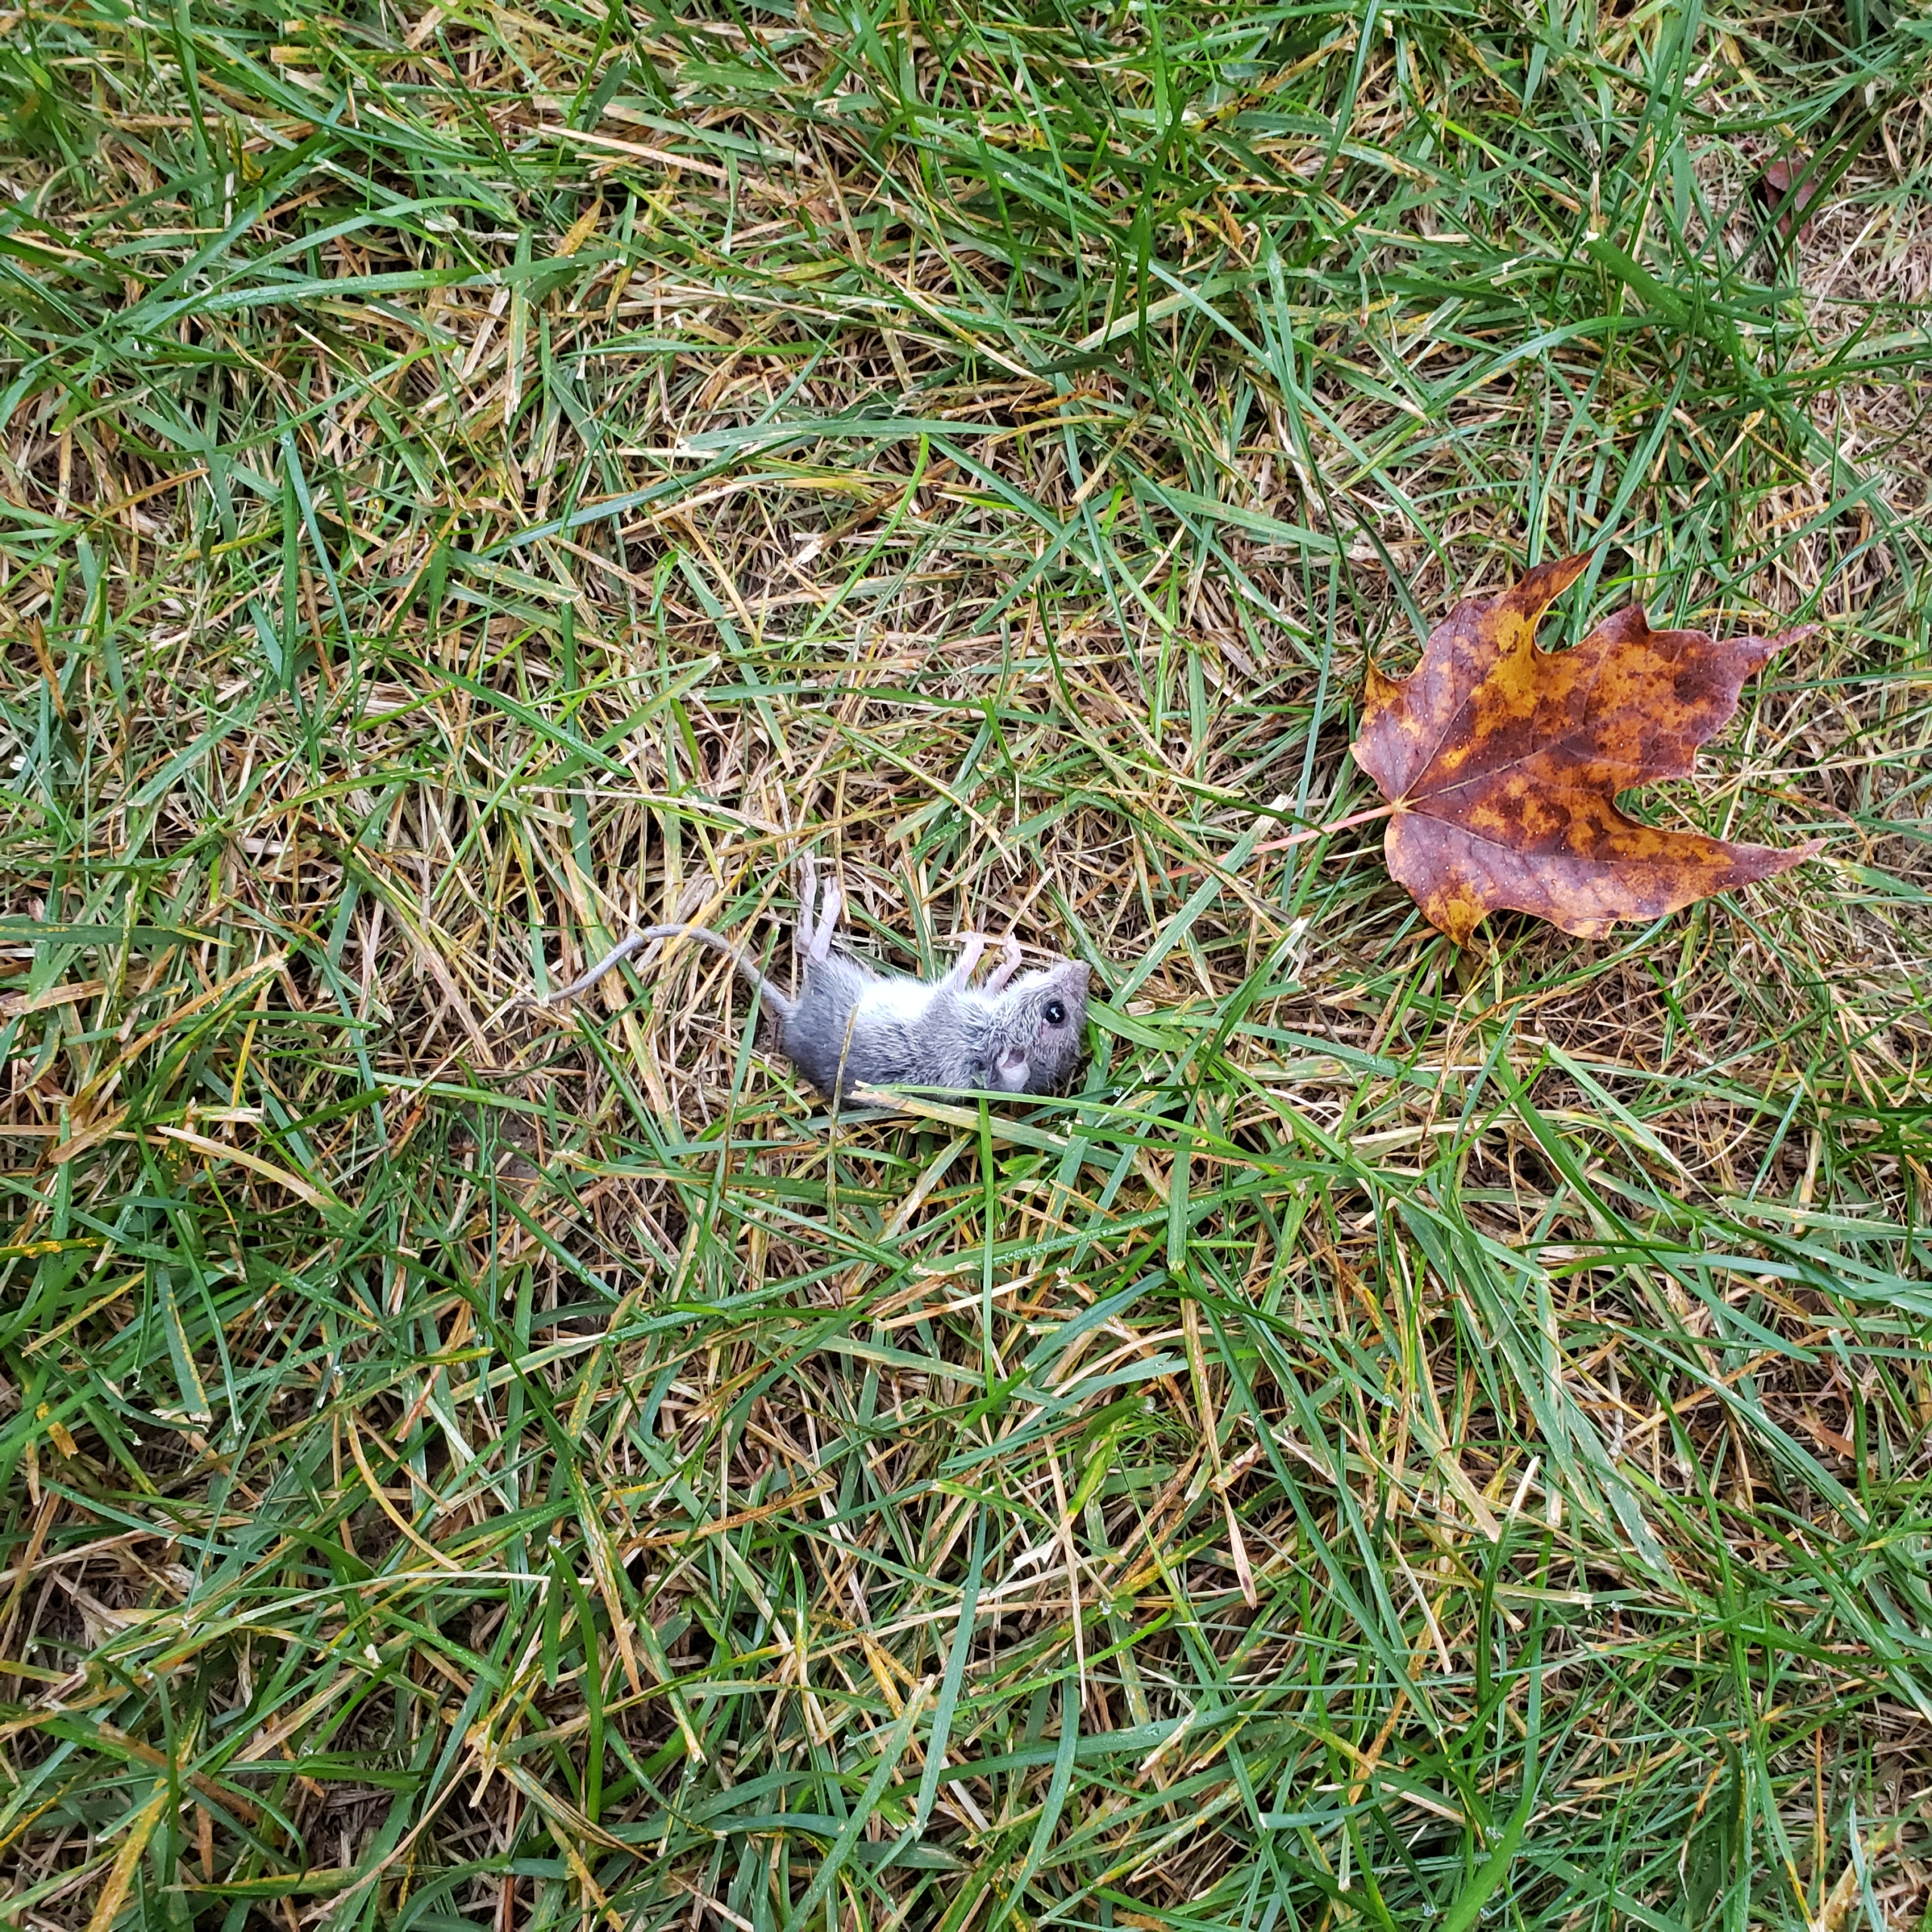 close up of dead mouse on grass